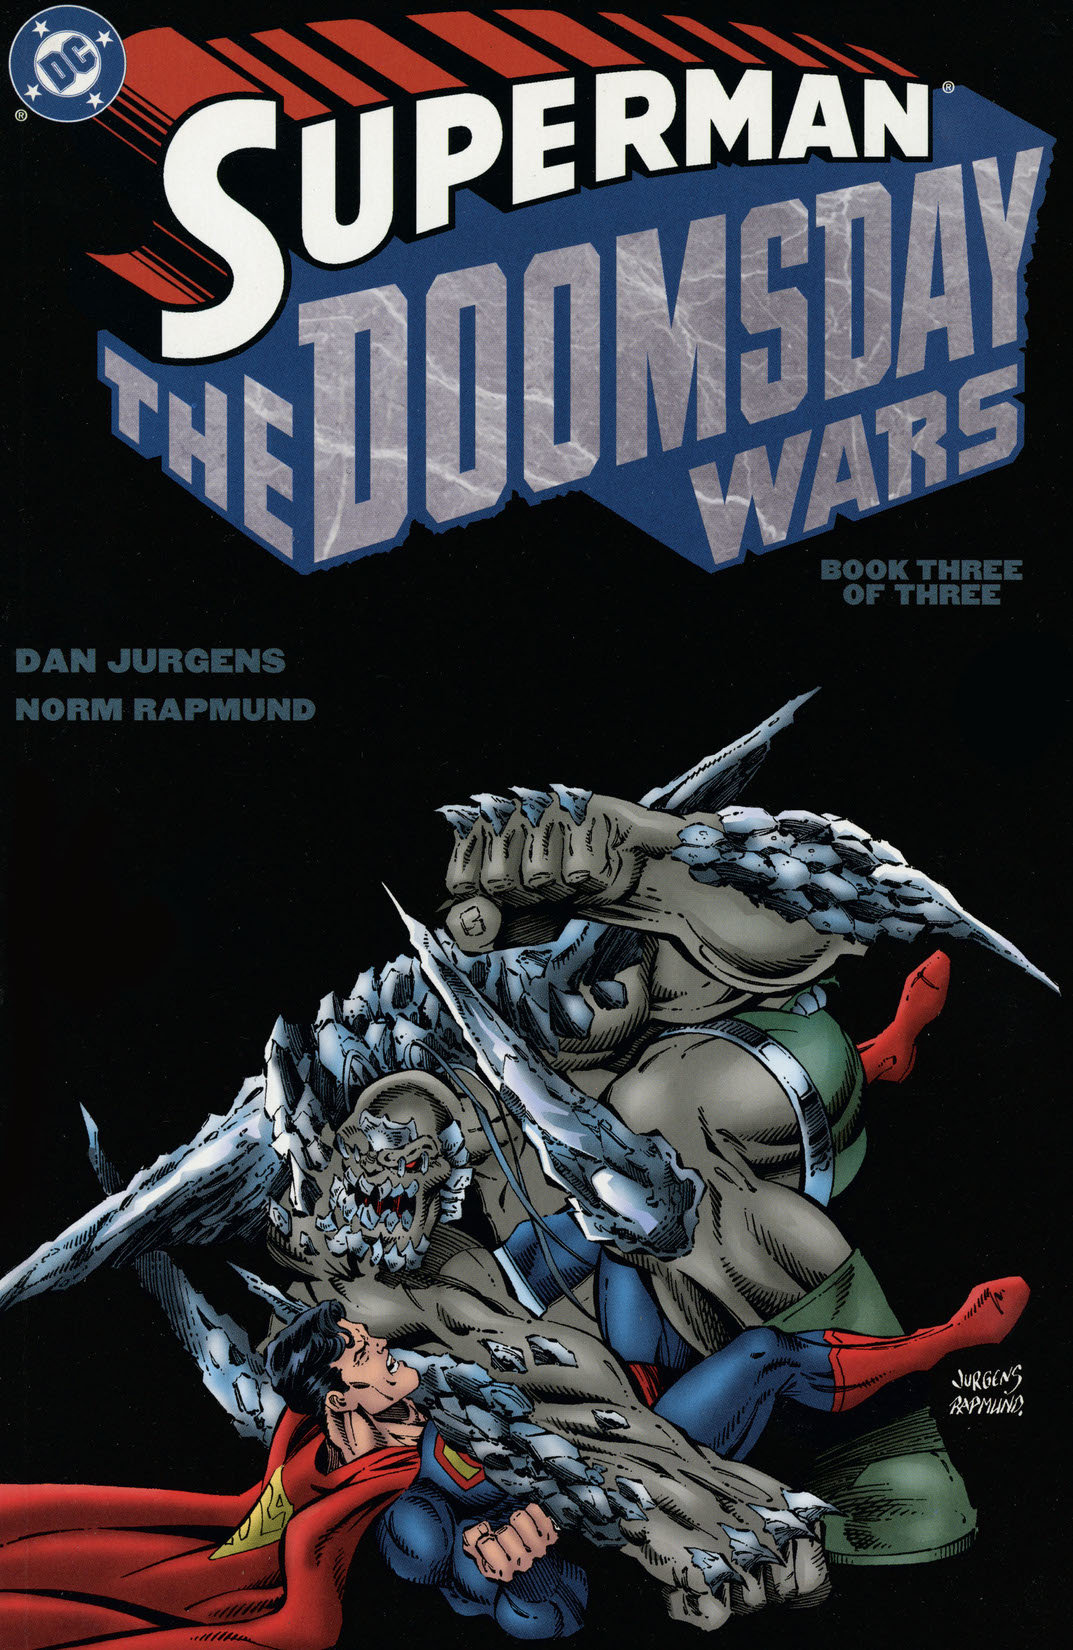 Superman: The Doomsday Wars #3 preview images